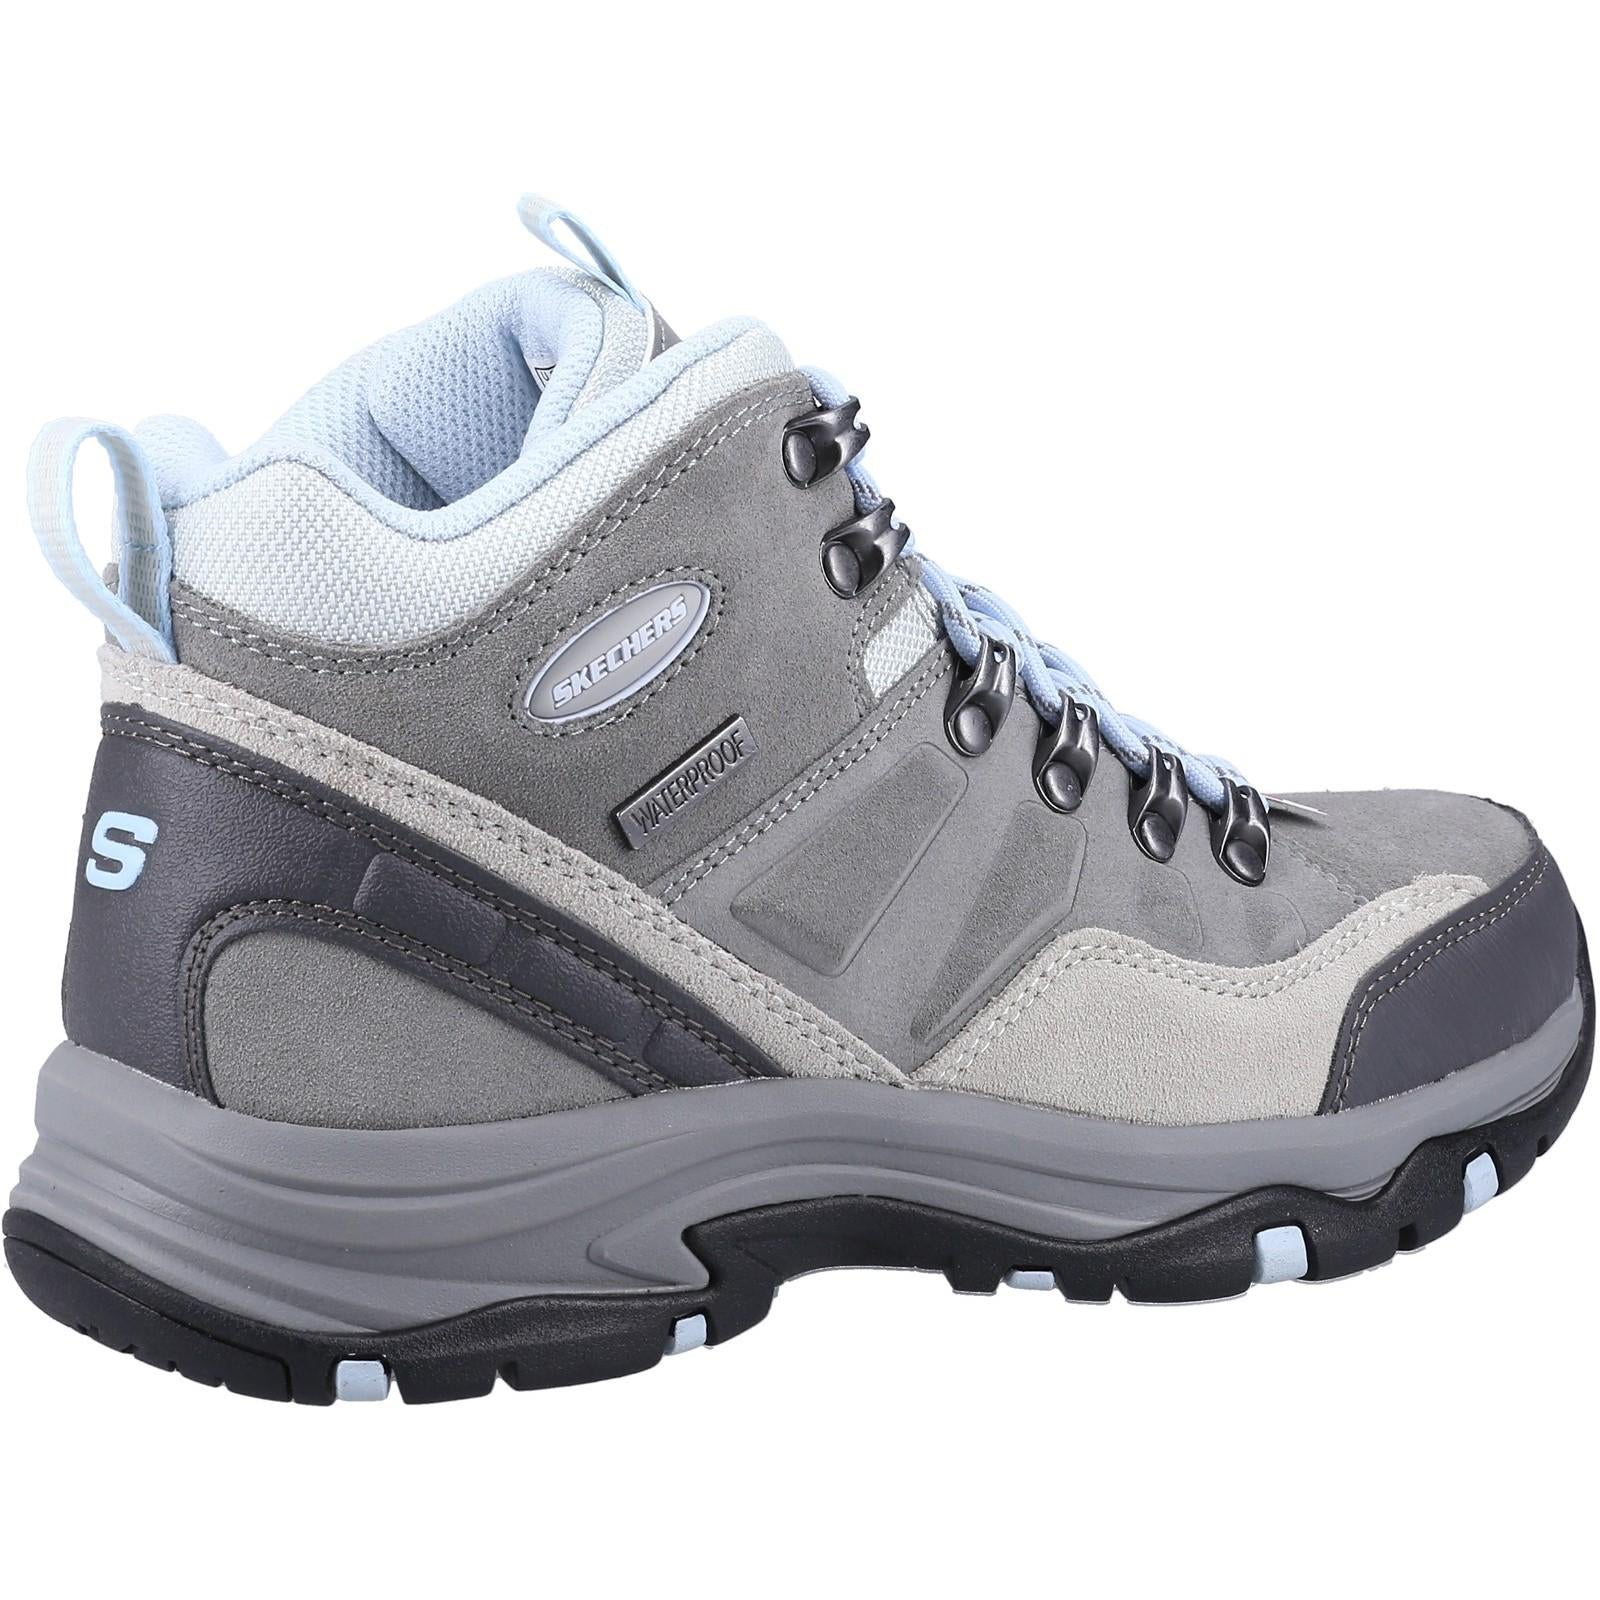 Skechers Trego Rocky Mountain Hiking Boots